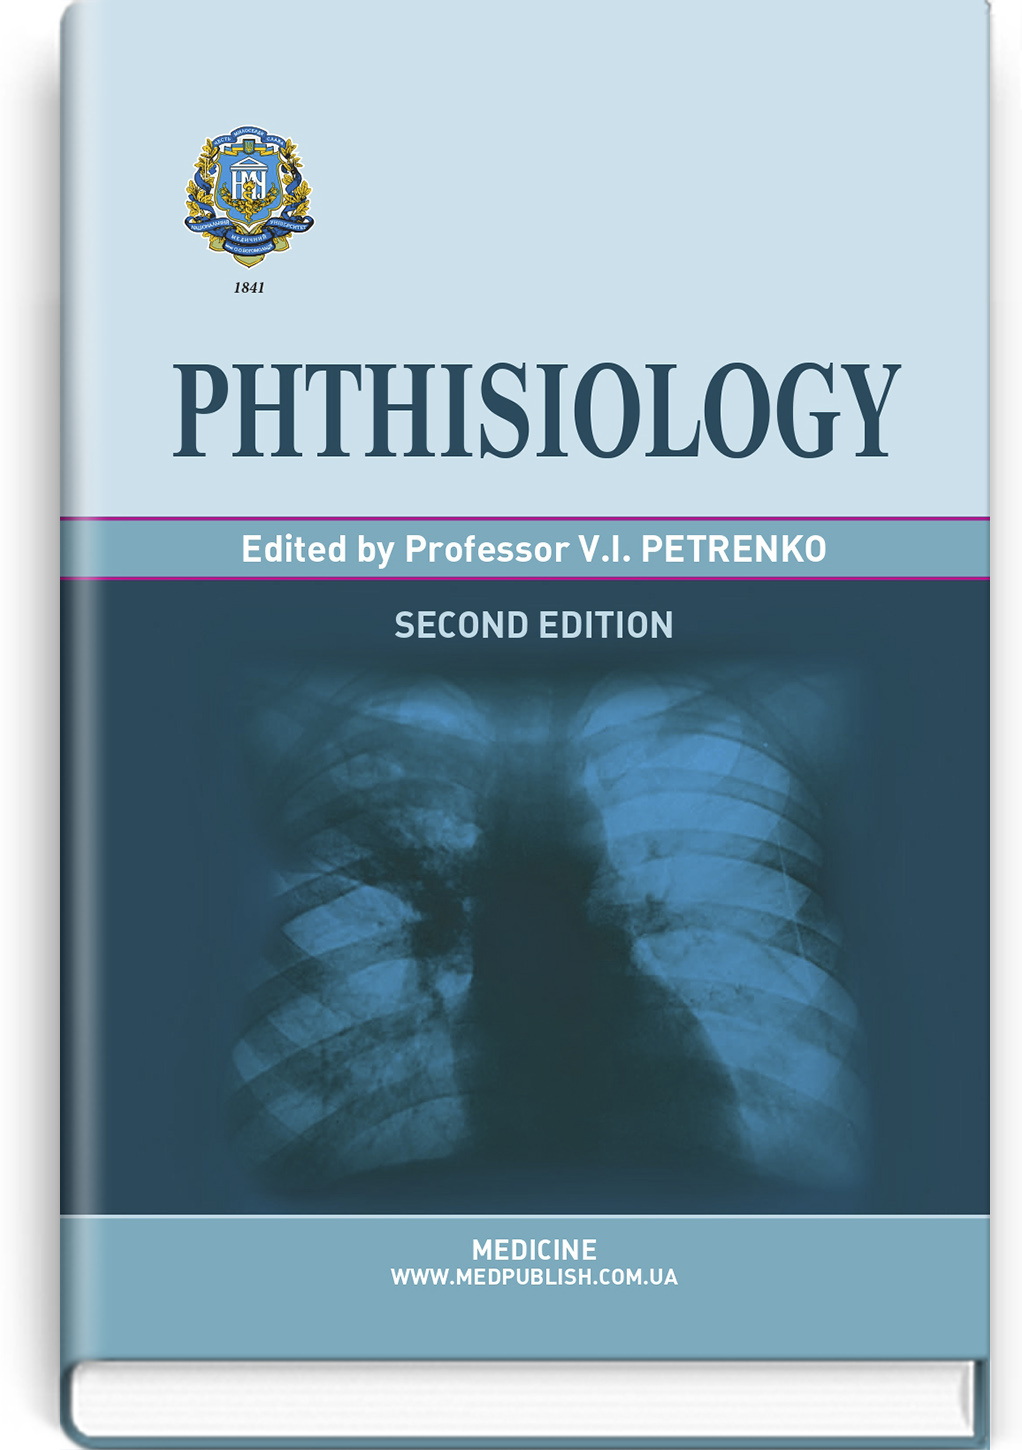 Phthisiology: textbook